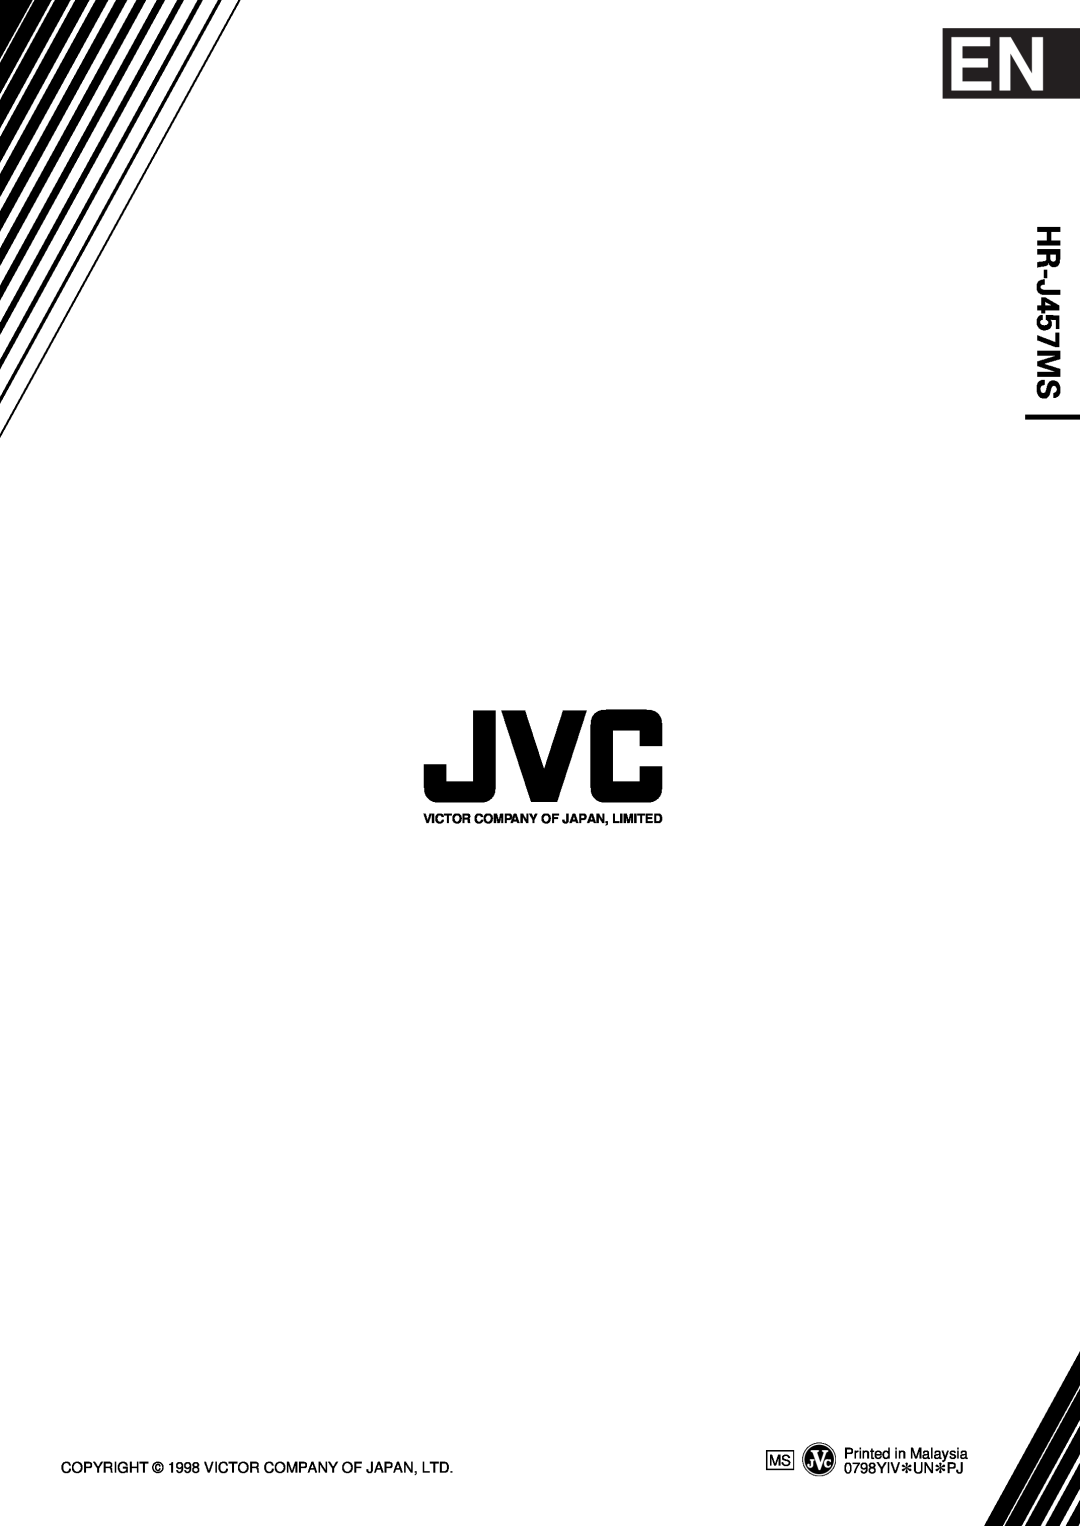 JVC HR-J457MS specifications Printed in Malaysia 0798YIV*UN*PJ 